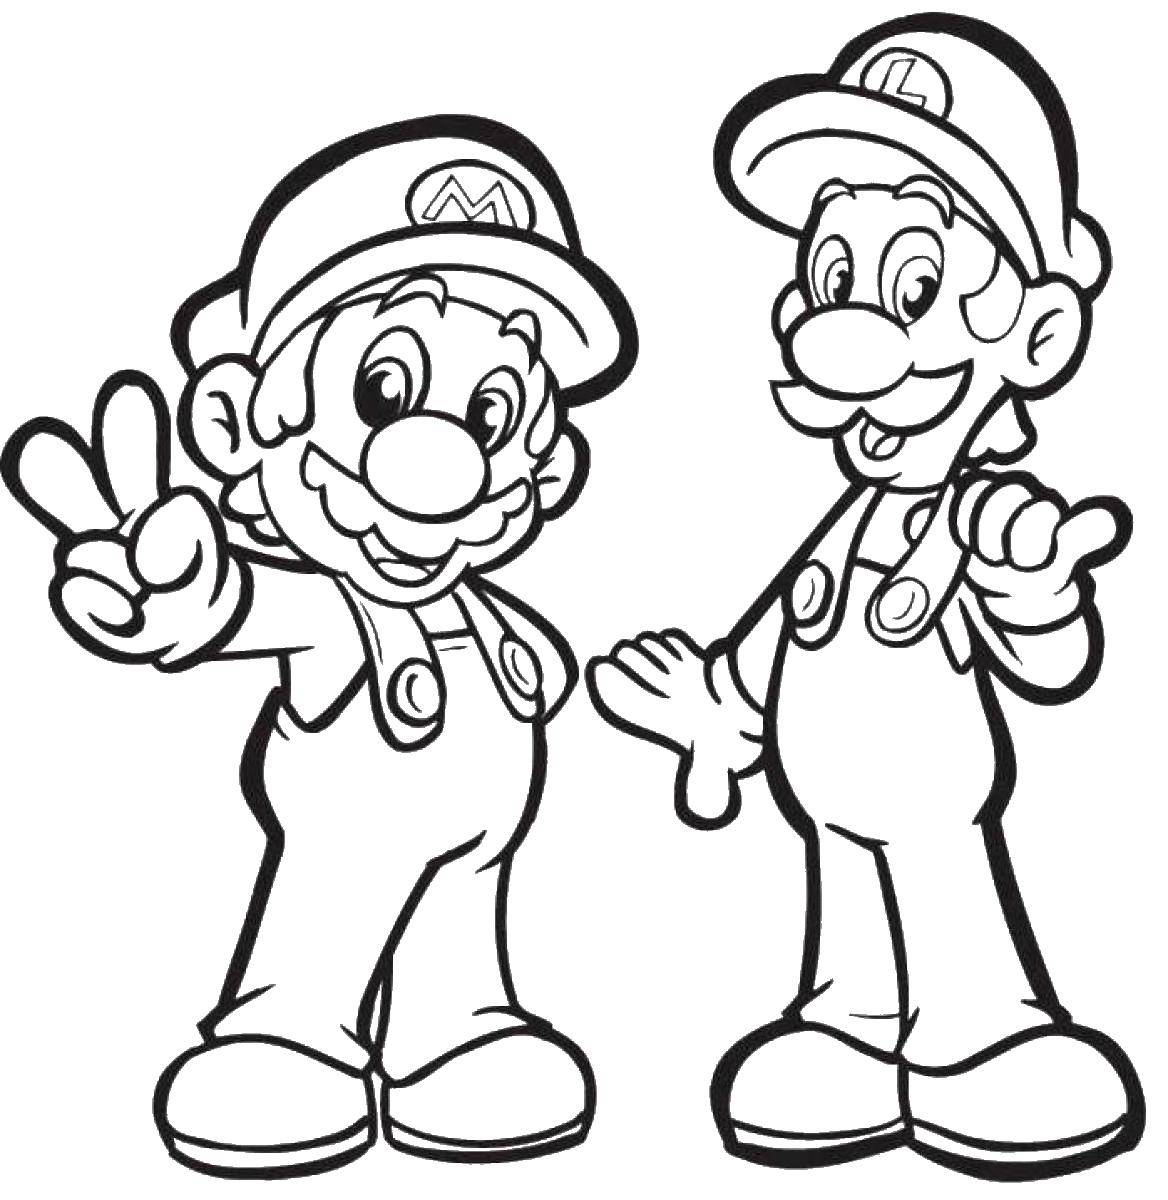 Coloring Plumbers Mario. Category The character from the game. Tags:  Games, Mario.